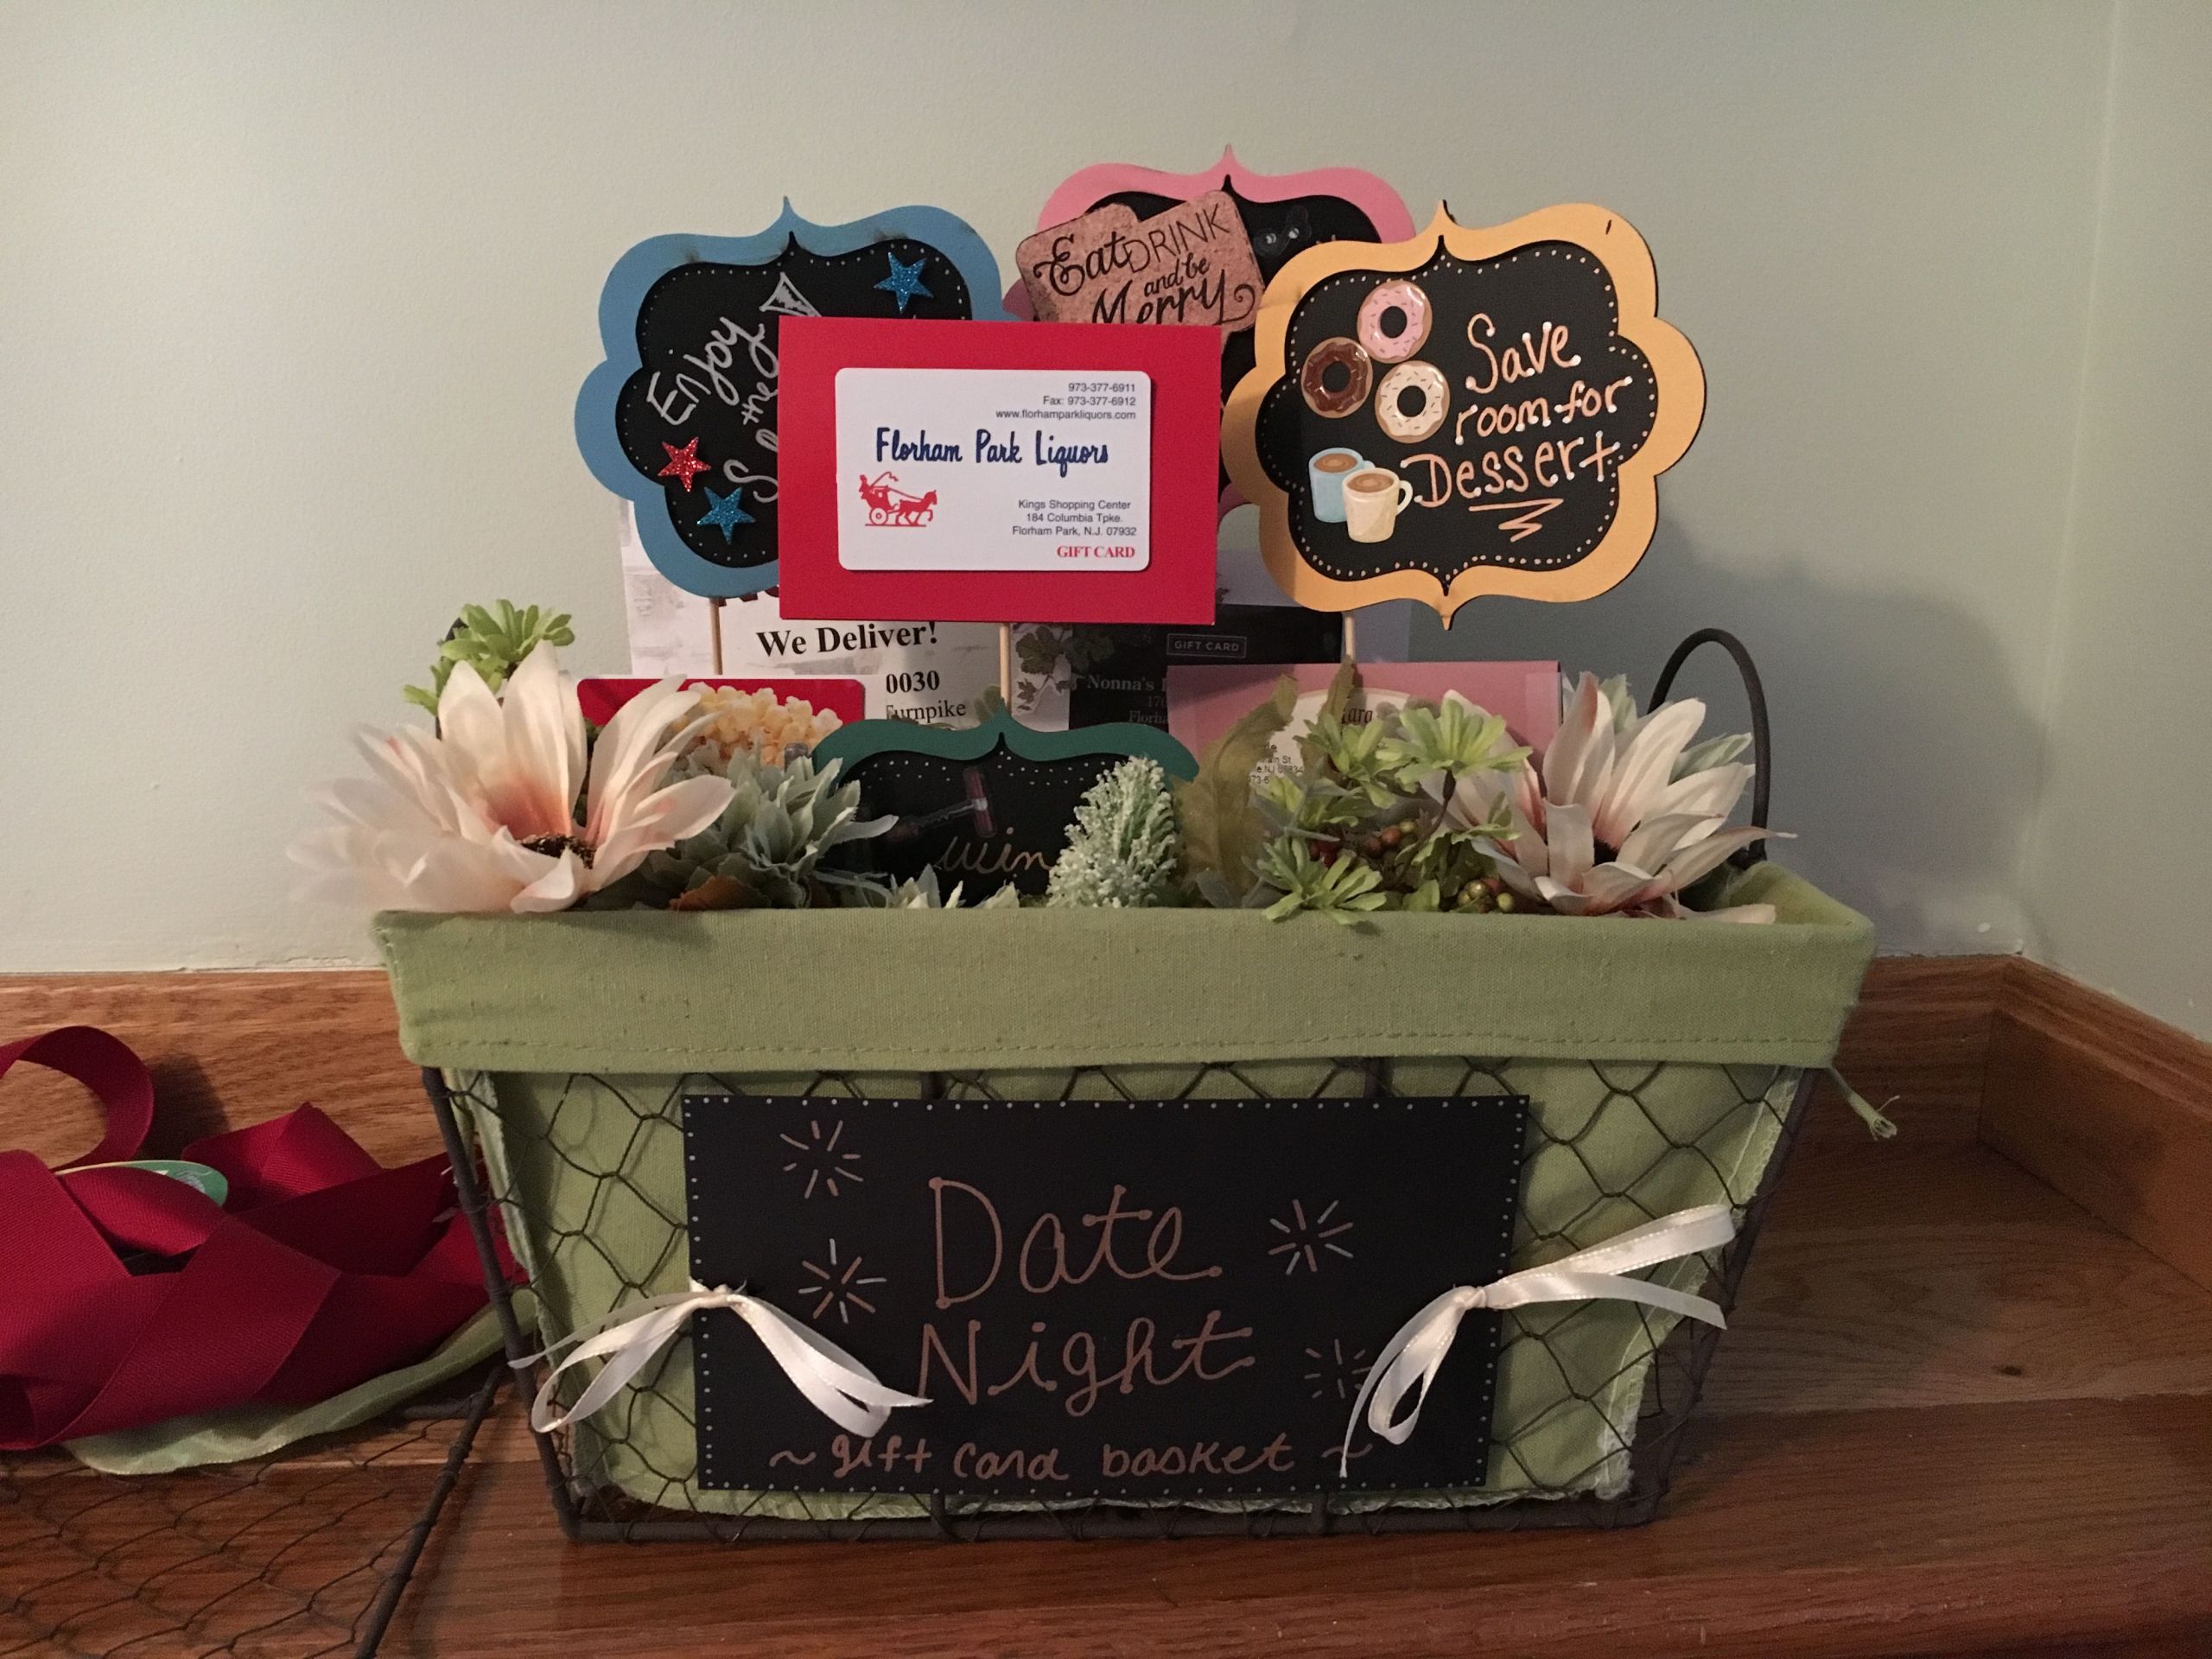 Movie Gift Card Basket Ideas
 Tricky tray basket Cute idea for a date night with dinner